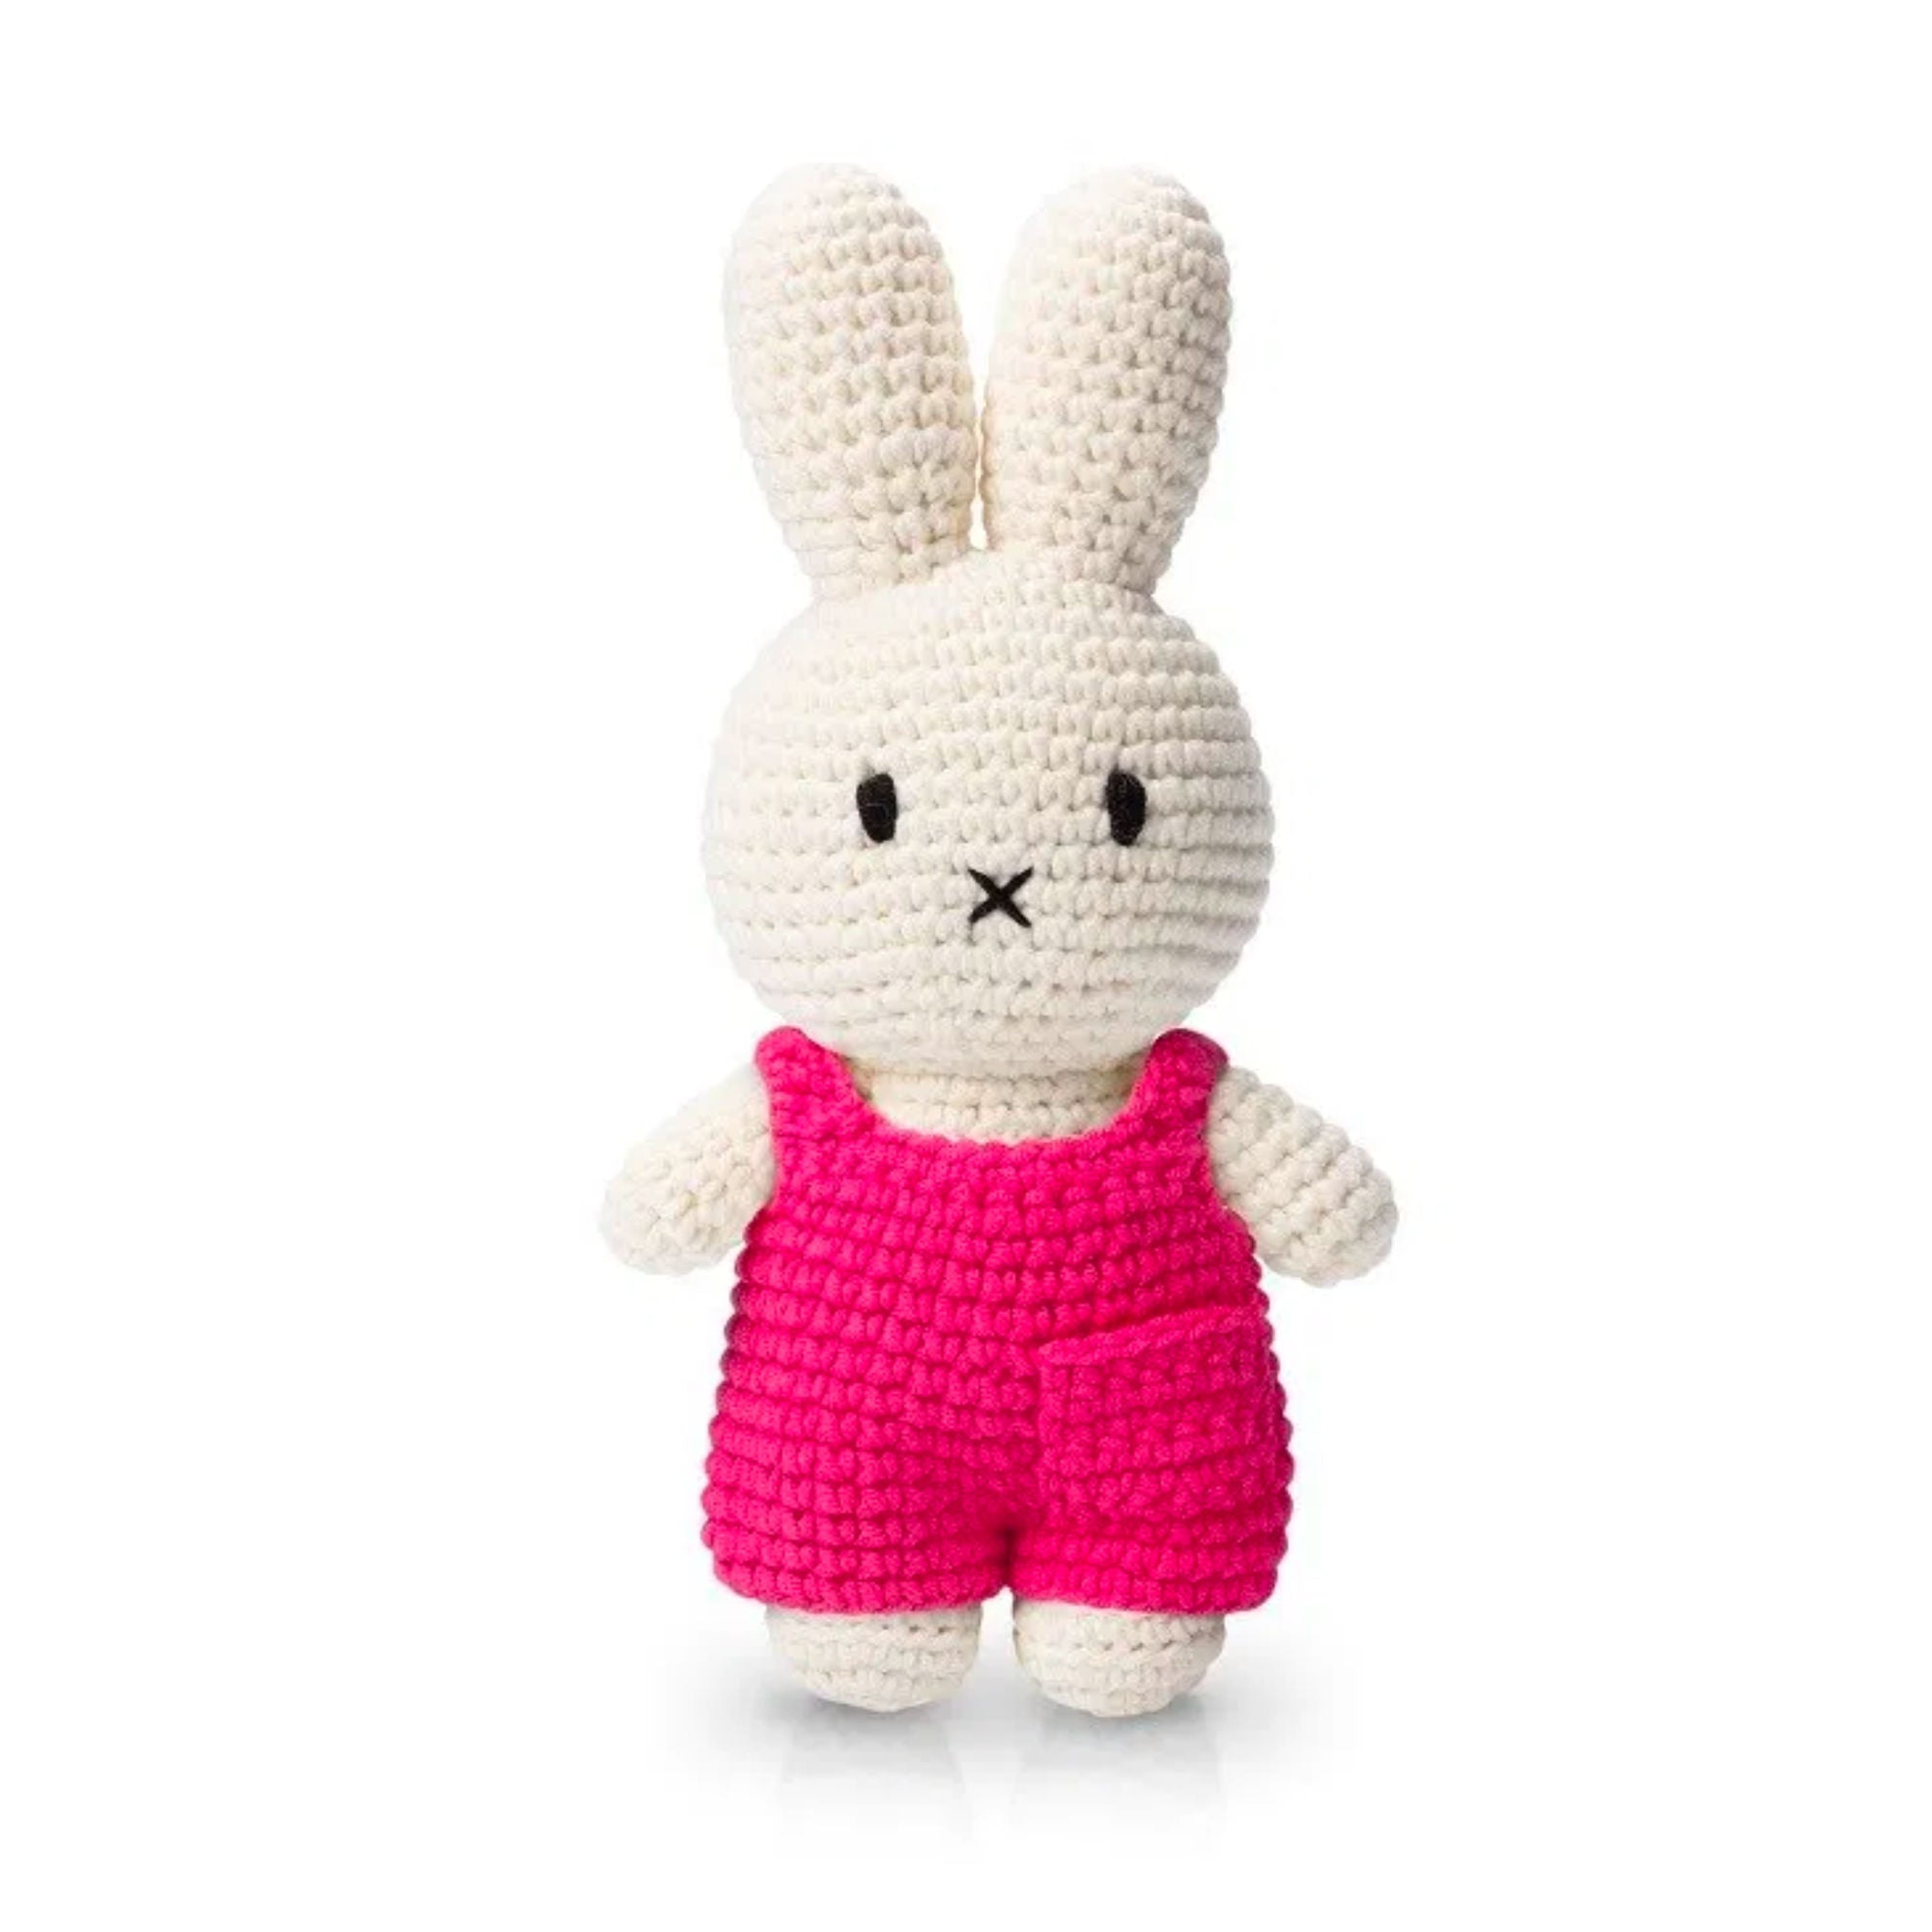 Just Dutch handmade doll, Miffy and her pink overall